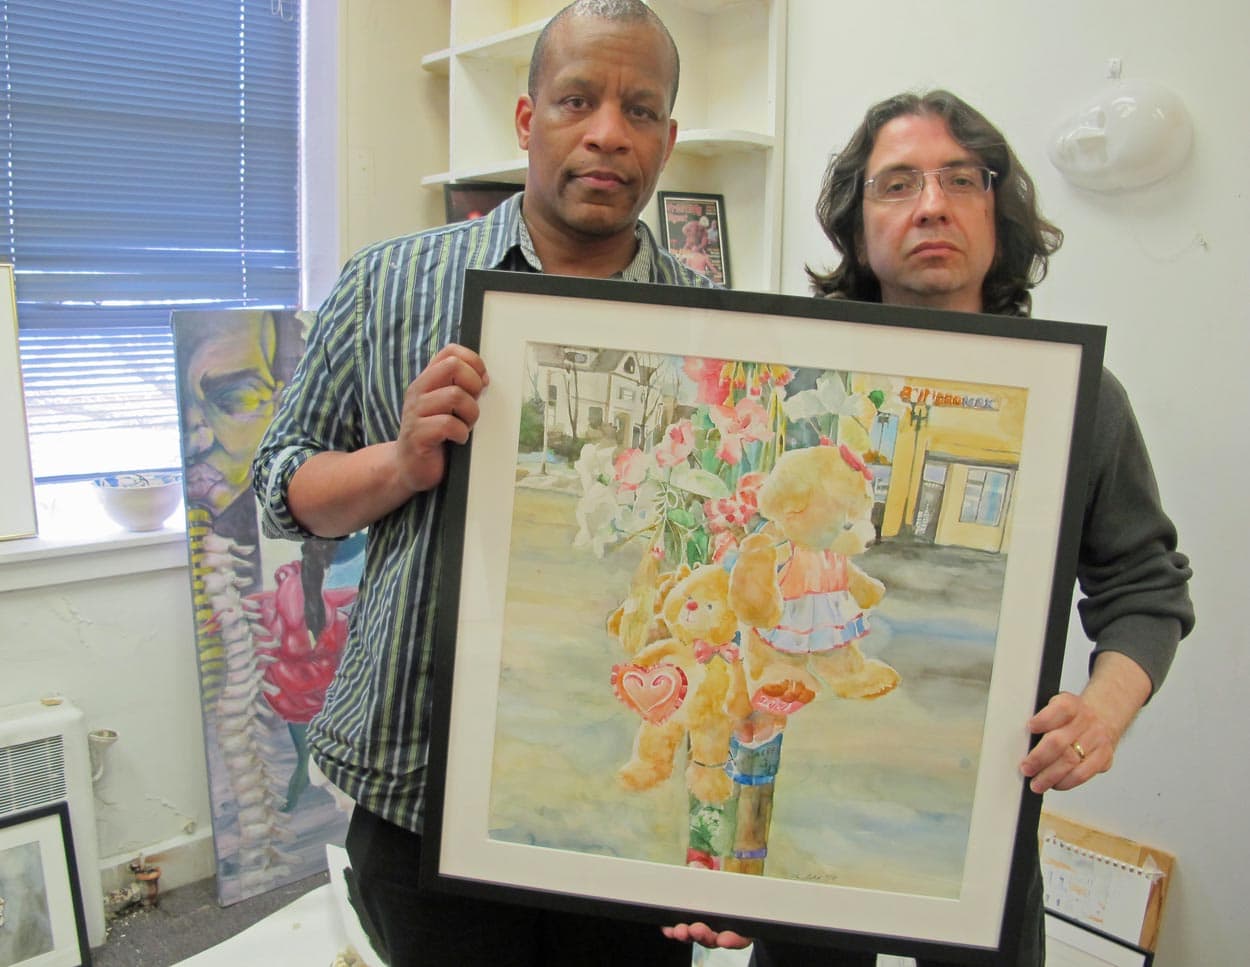 Artists Shea Justice, left, and Jason Pramas are using the marathon anniversary to raise questions and provoke debate with their art show "Boston Strong?." This painting, by Justice, shows a memorial in Egelston Square, Roxbury. (Andrea Shea/WBUR)